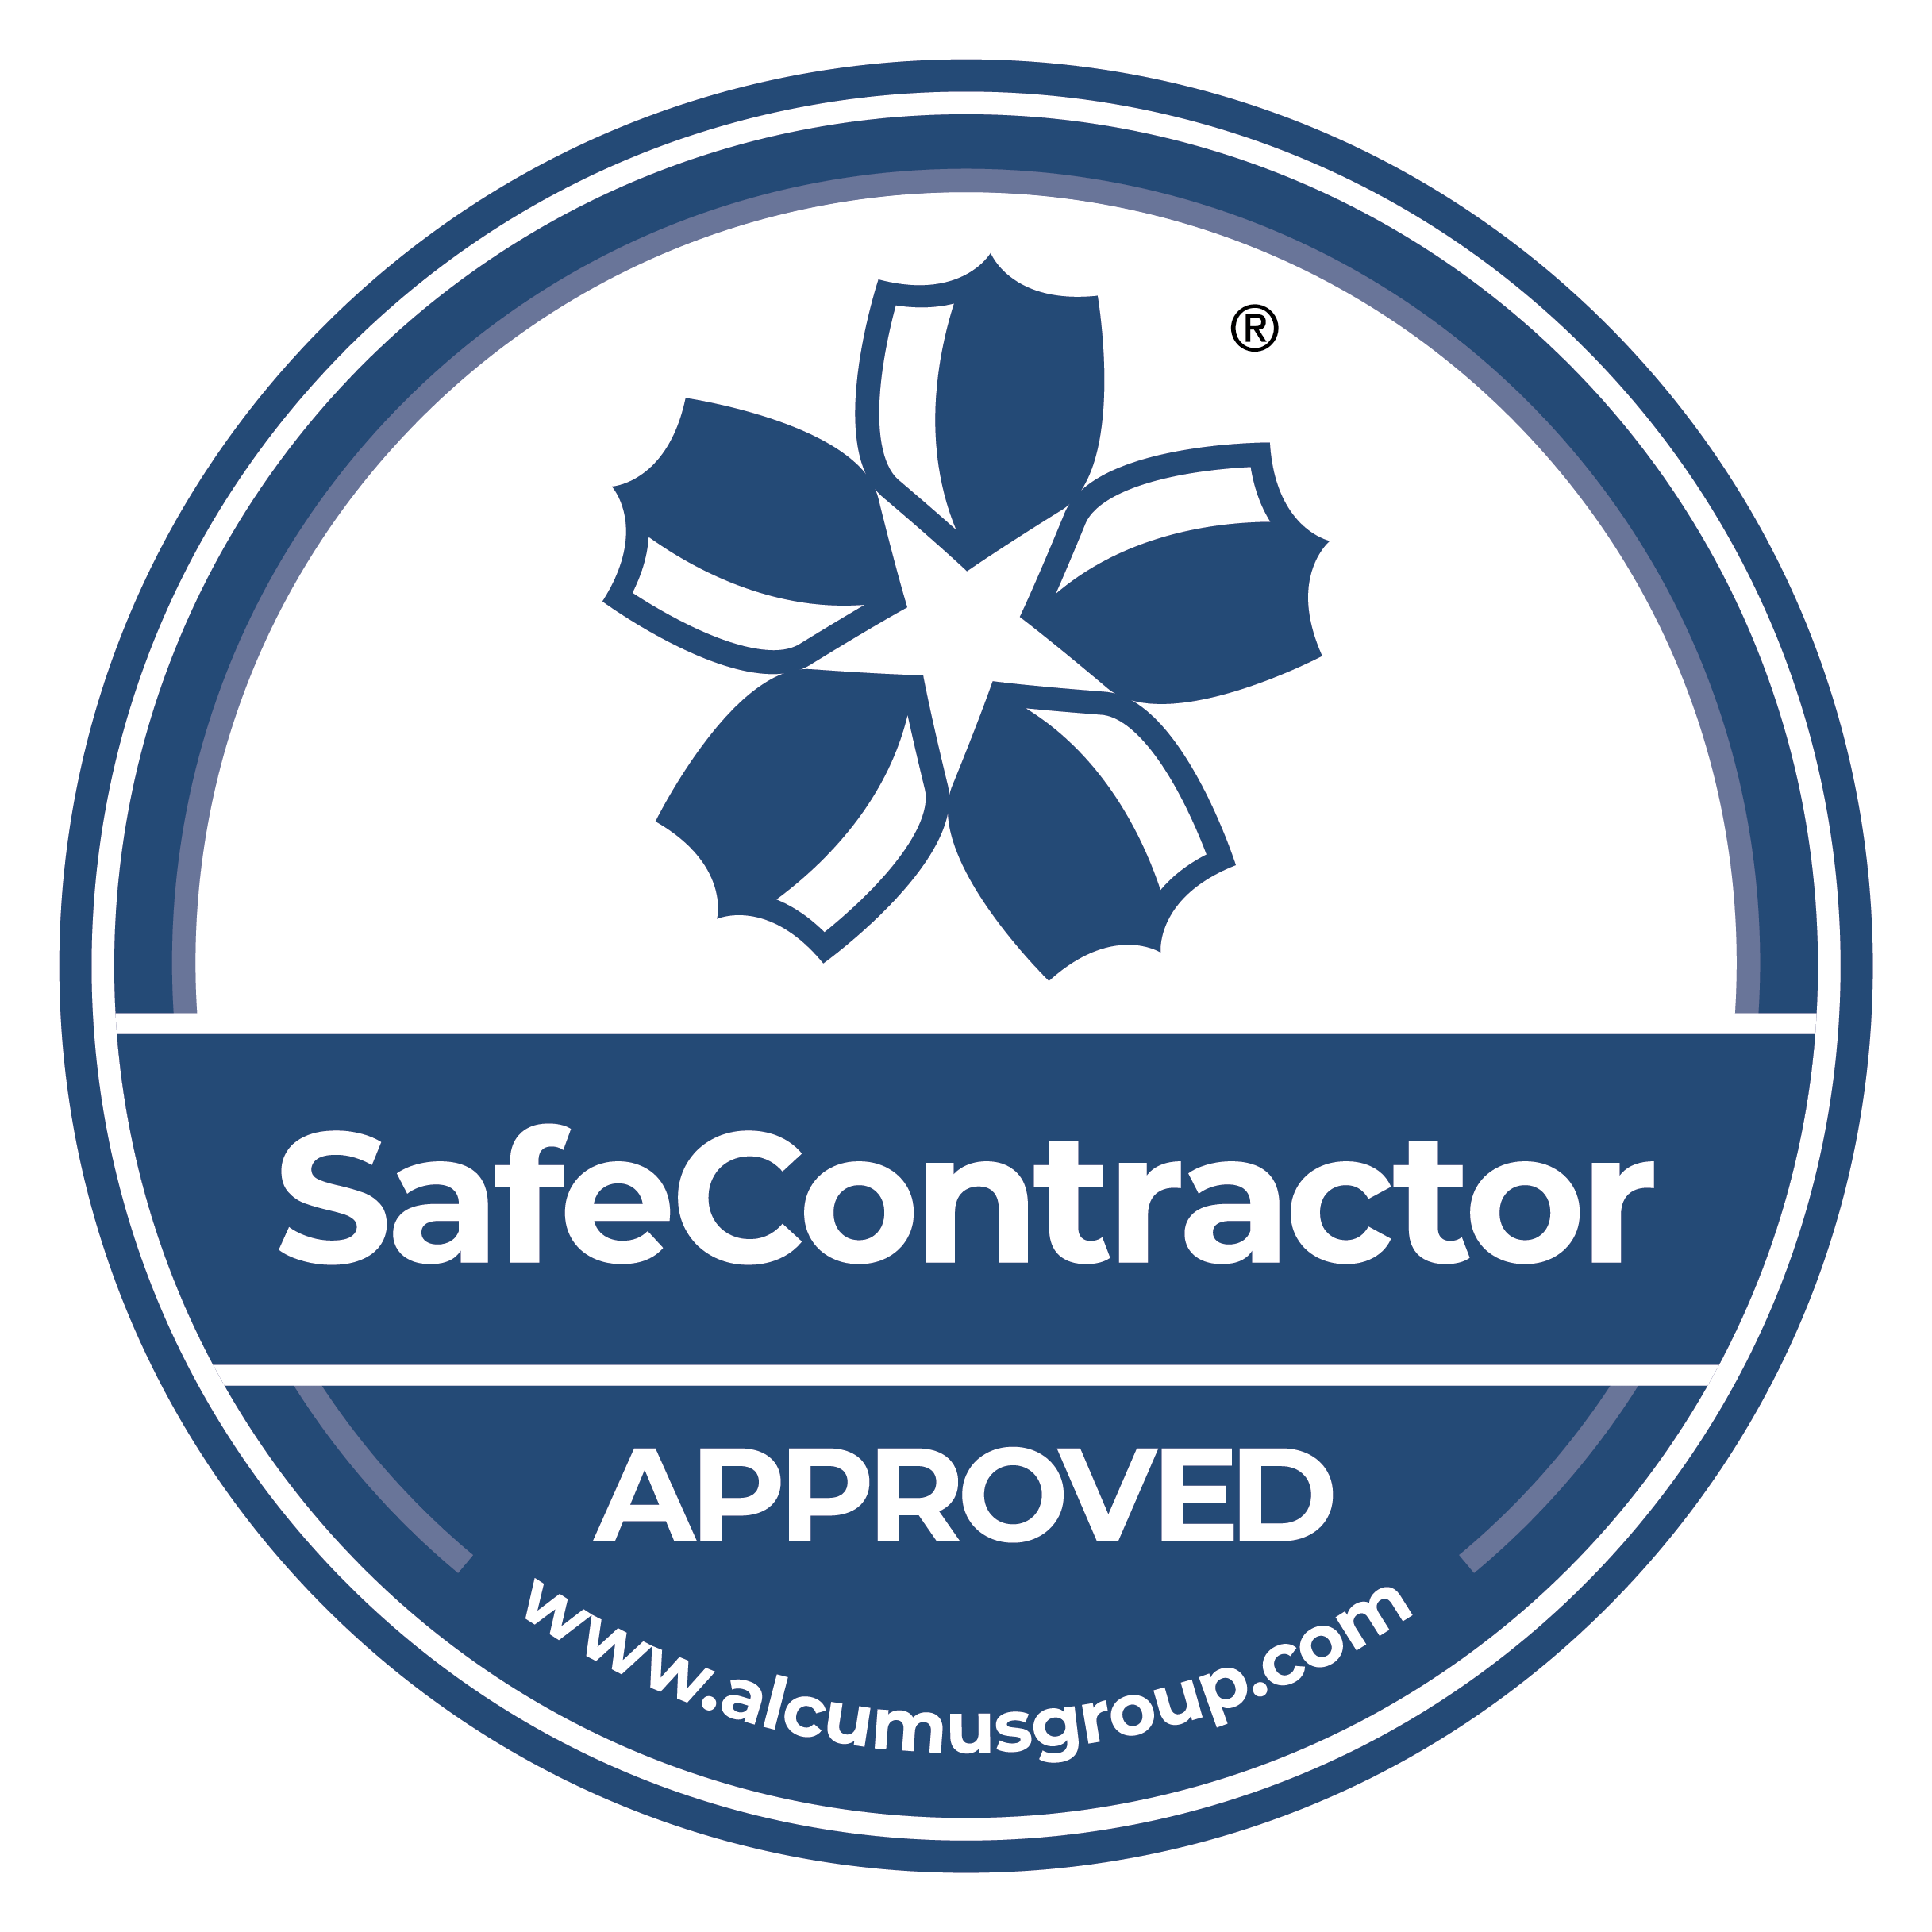 Ultra Cleaning Service has SAFE CONTRACTOR accreditation